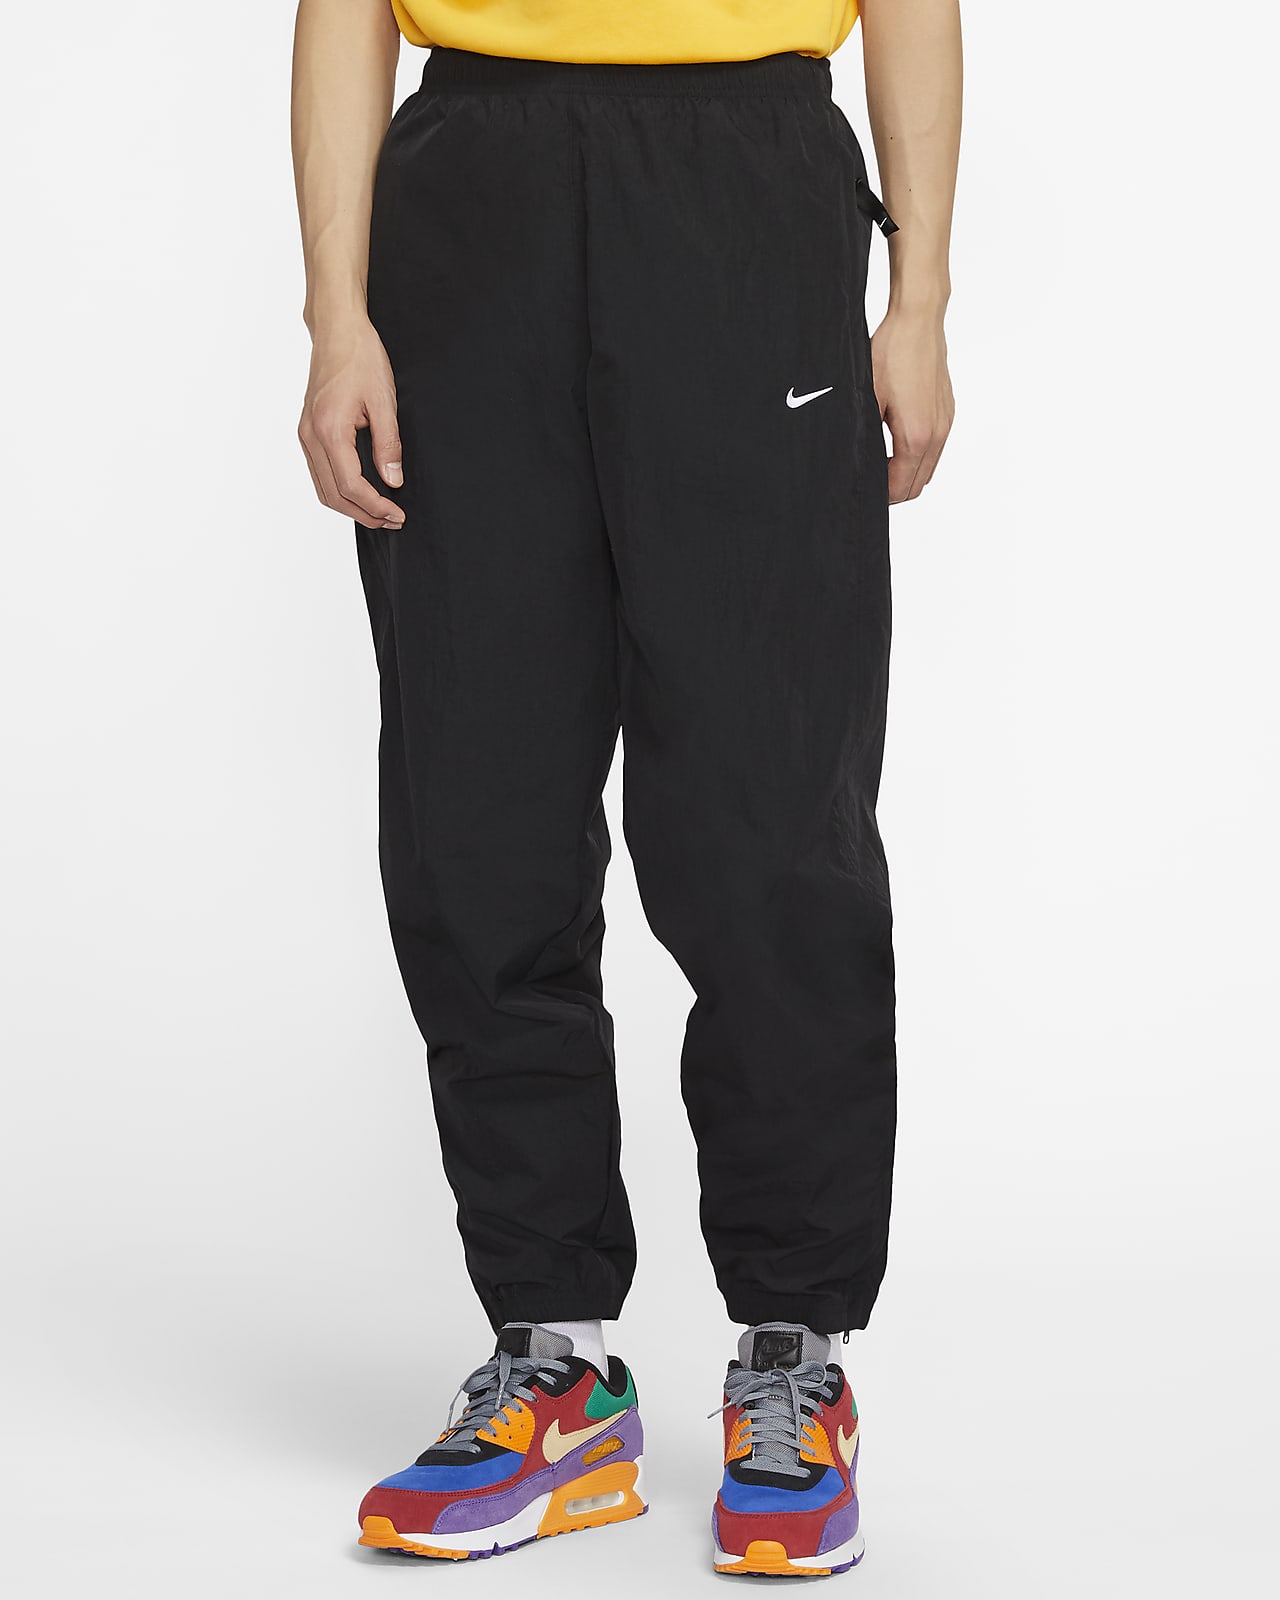 nike air track bottoms